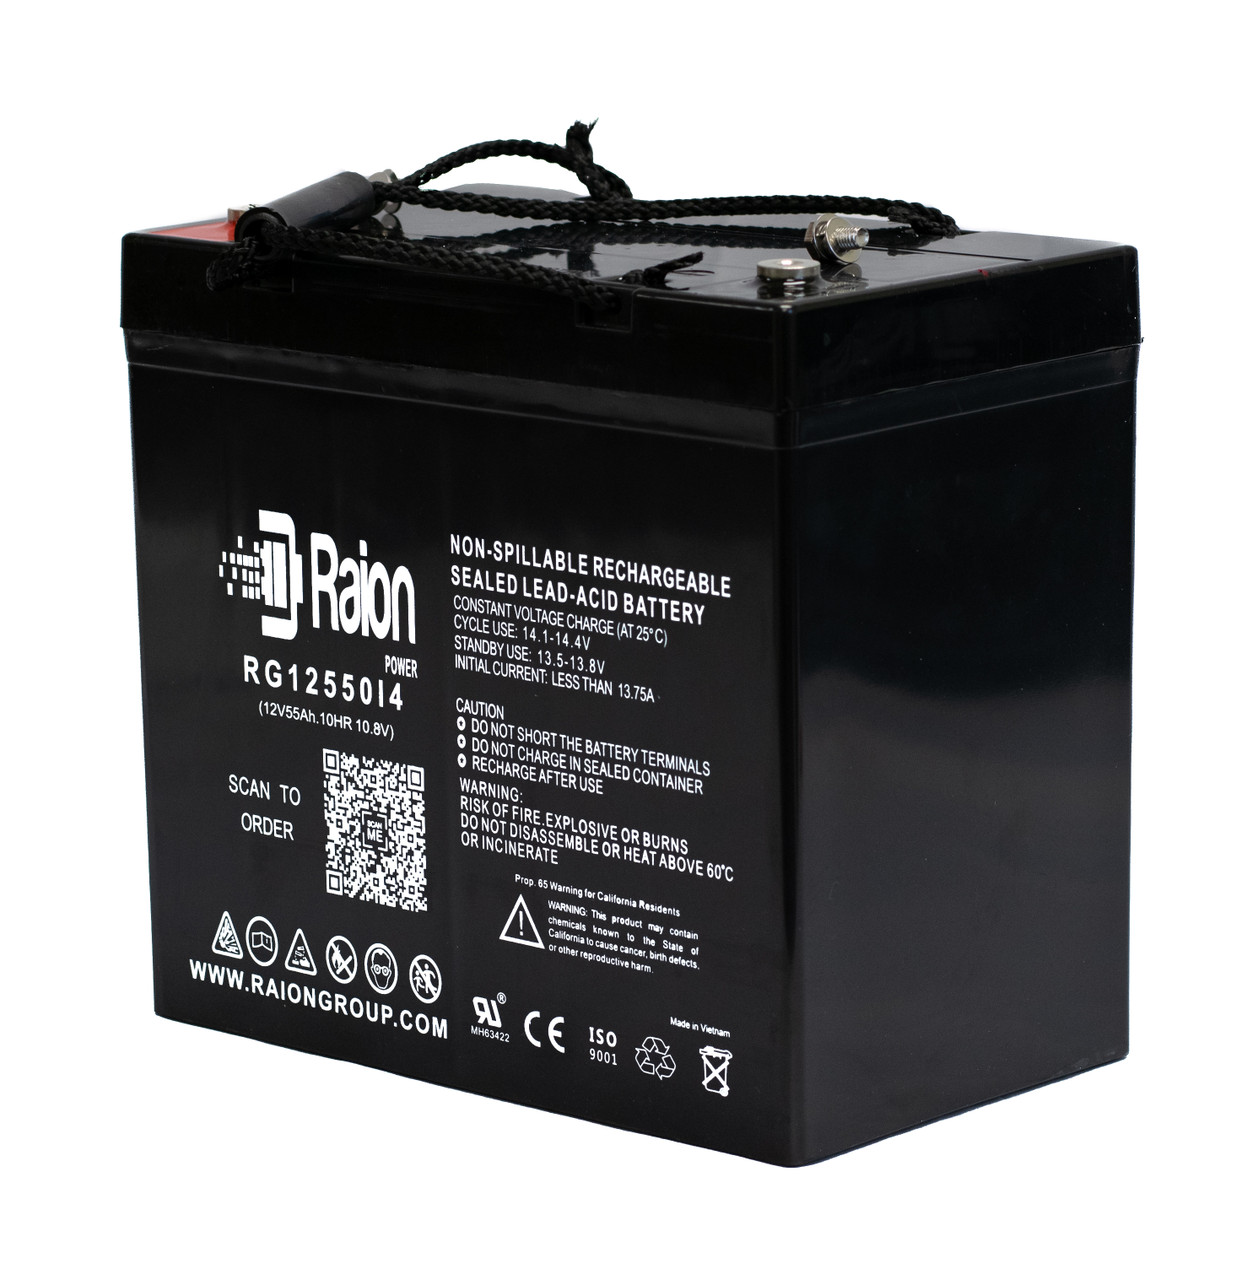 Raion Power Replacement 12V 55Ah Emergency Light Battery for ELS EDS12500 - 1 Pack